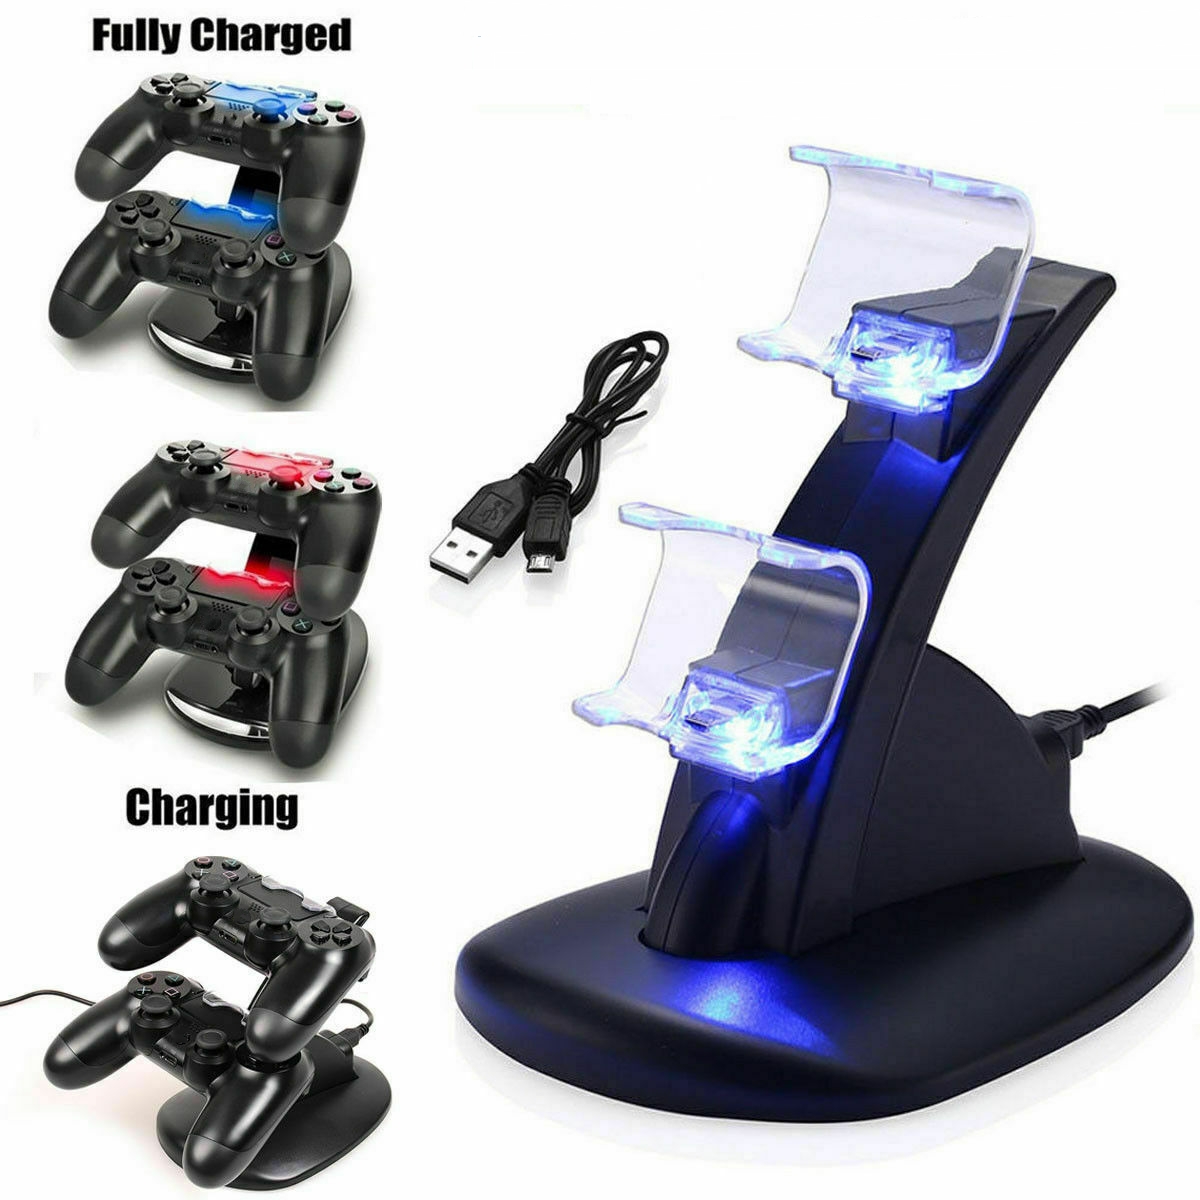 playstation stand and charger